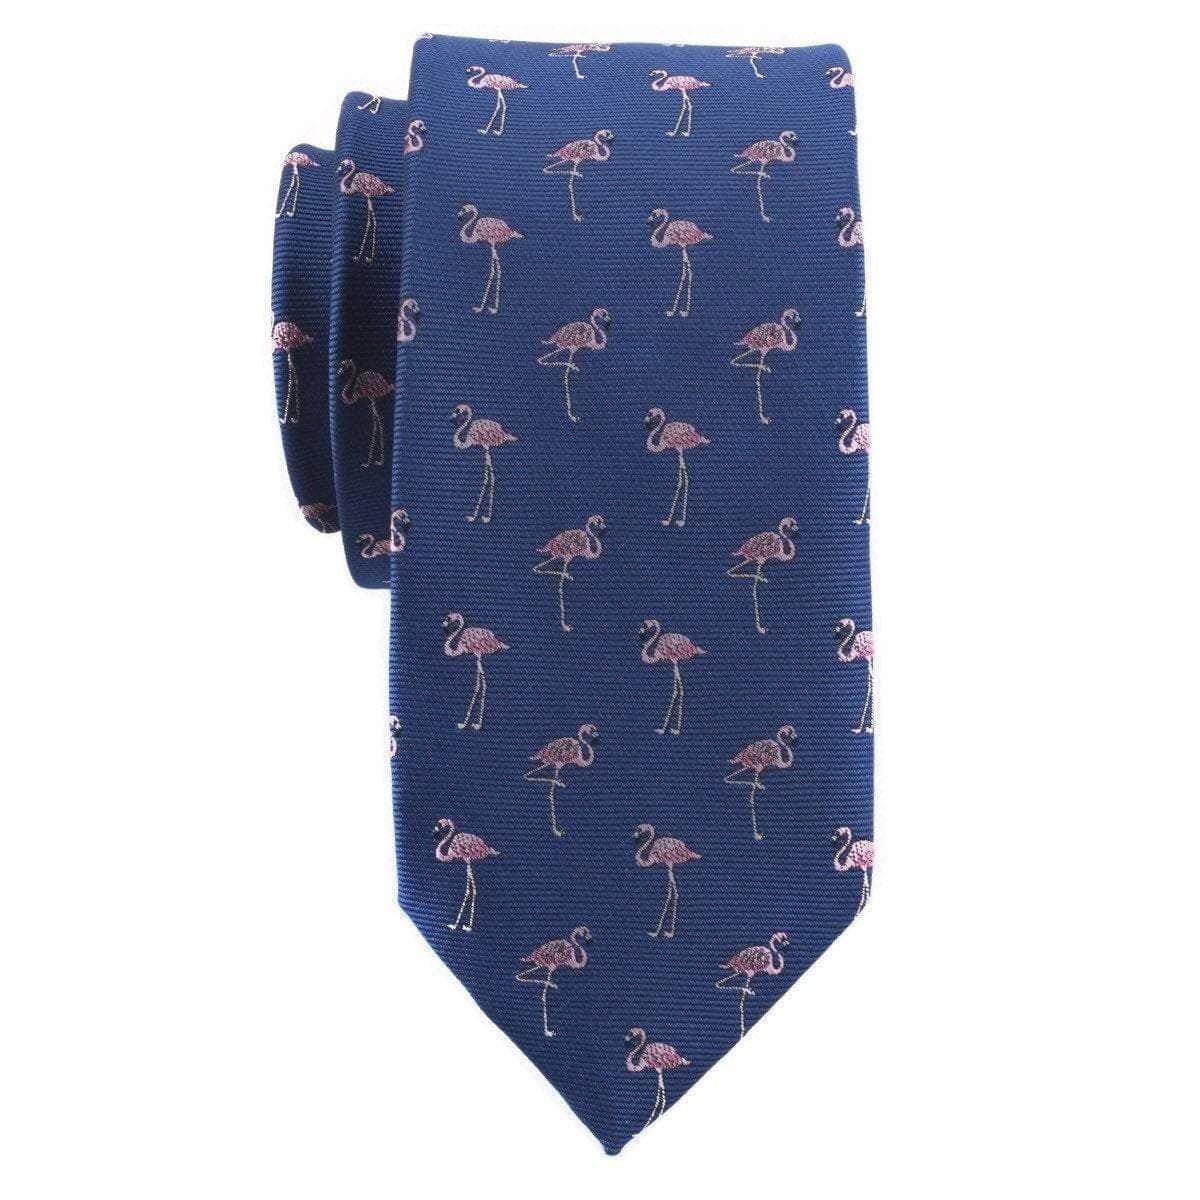 Blue and Pink Flamingo Skinny Tie 2.36 MIA - MYTIESHOP-Neckties-Blue and Pink Flamingo Skinny Tie weddings and events, great for prom and anniversary gifts. Mens floral ties near me us ties tie shops cool ties skinny tie Cotton-Mytieshop. Skinny ties for weddings anniversaries. Father of bride. Groomsmen. Cool skinny neckties for men. Neckwear for prom, missions and fancy events. Gift ideas for men. Anniversaries ideas. Wedding aesthetics. Flower ties. Dry flower ties.